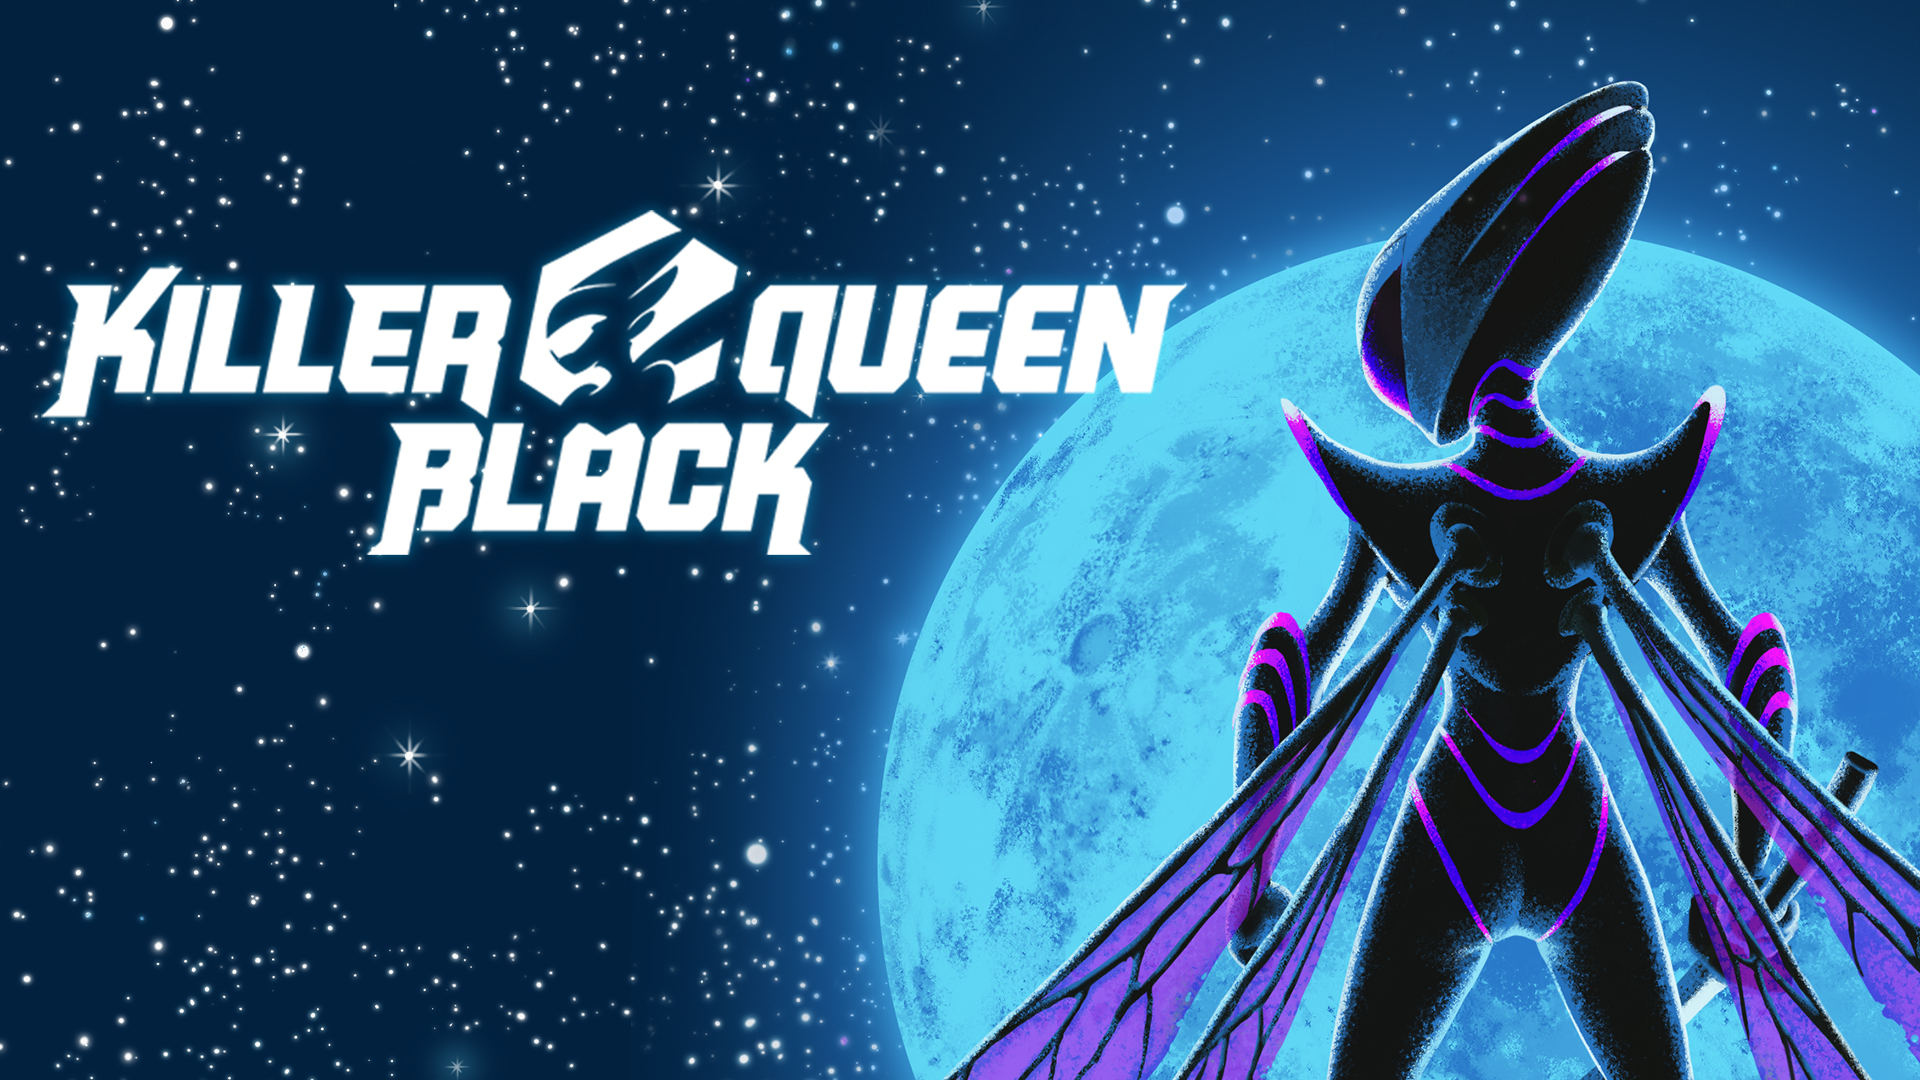 KILLER QUEEN BLACK PC Download free full game for windows